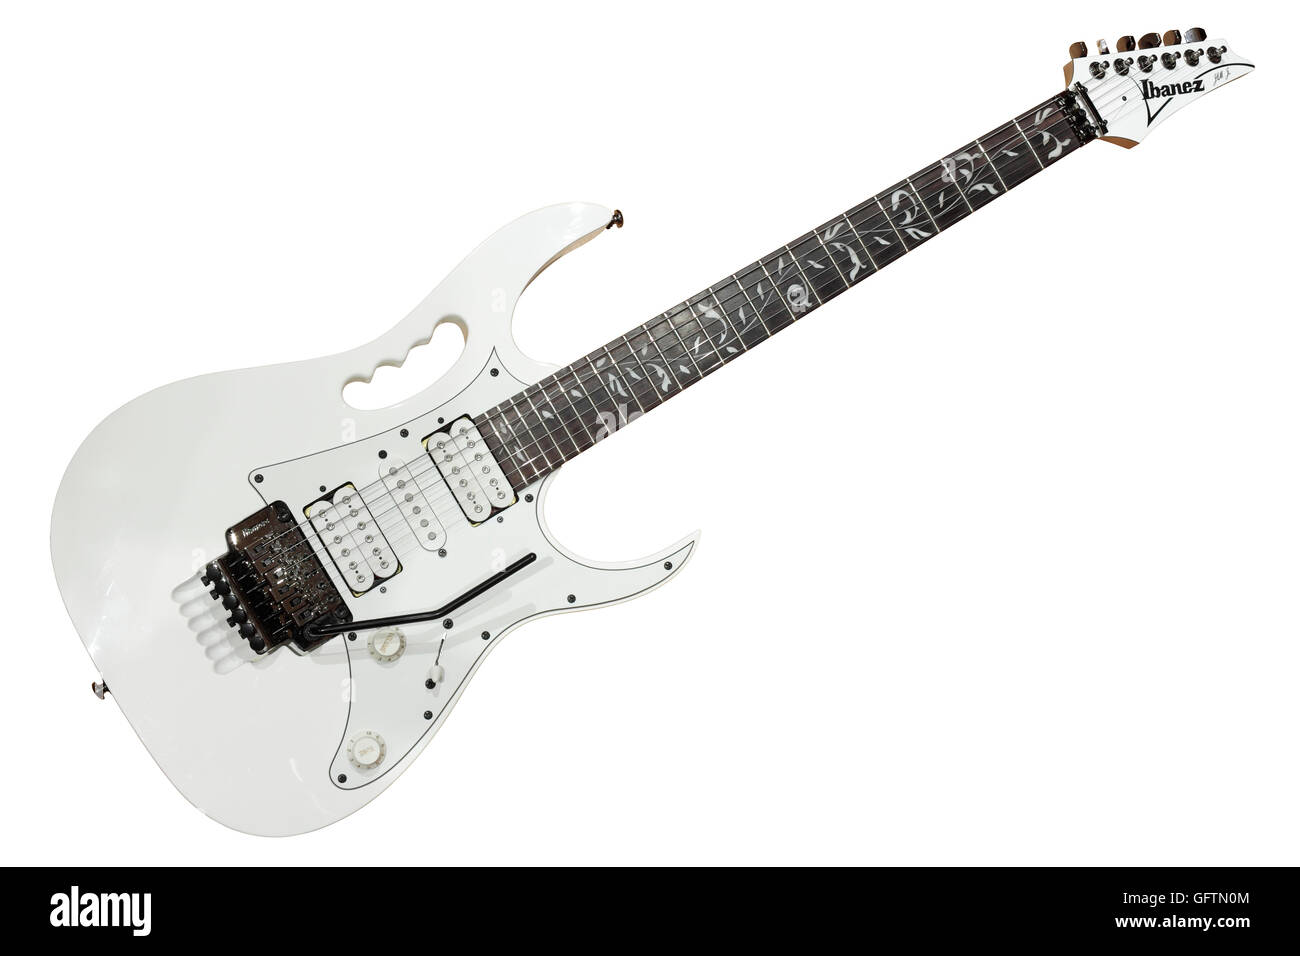 A White Ibanez Jem Jnr electric superstrat style guitar isolated on a white background Stock Photo